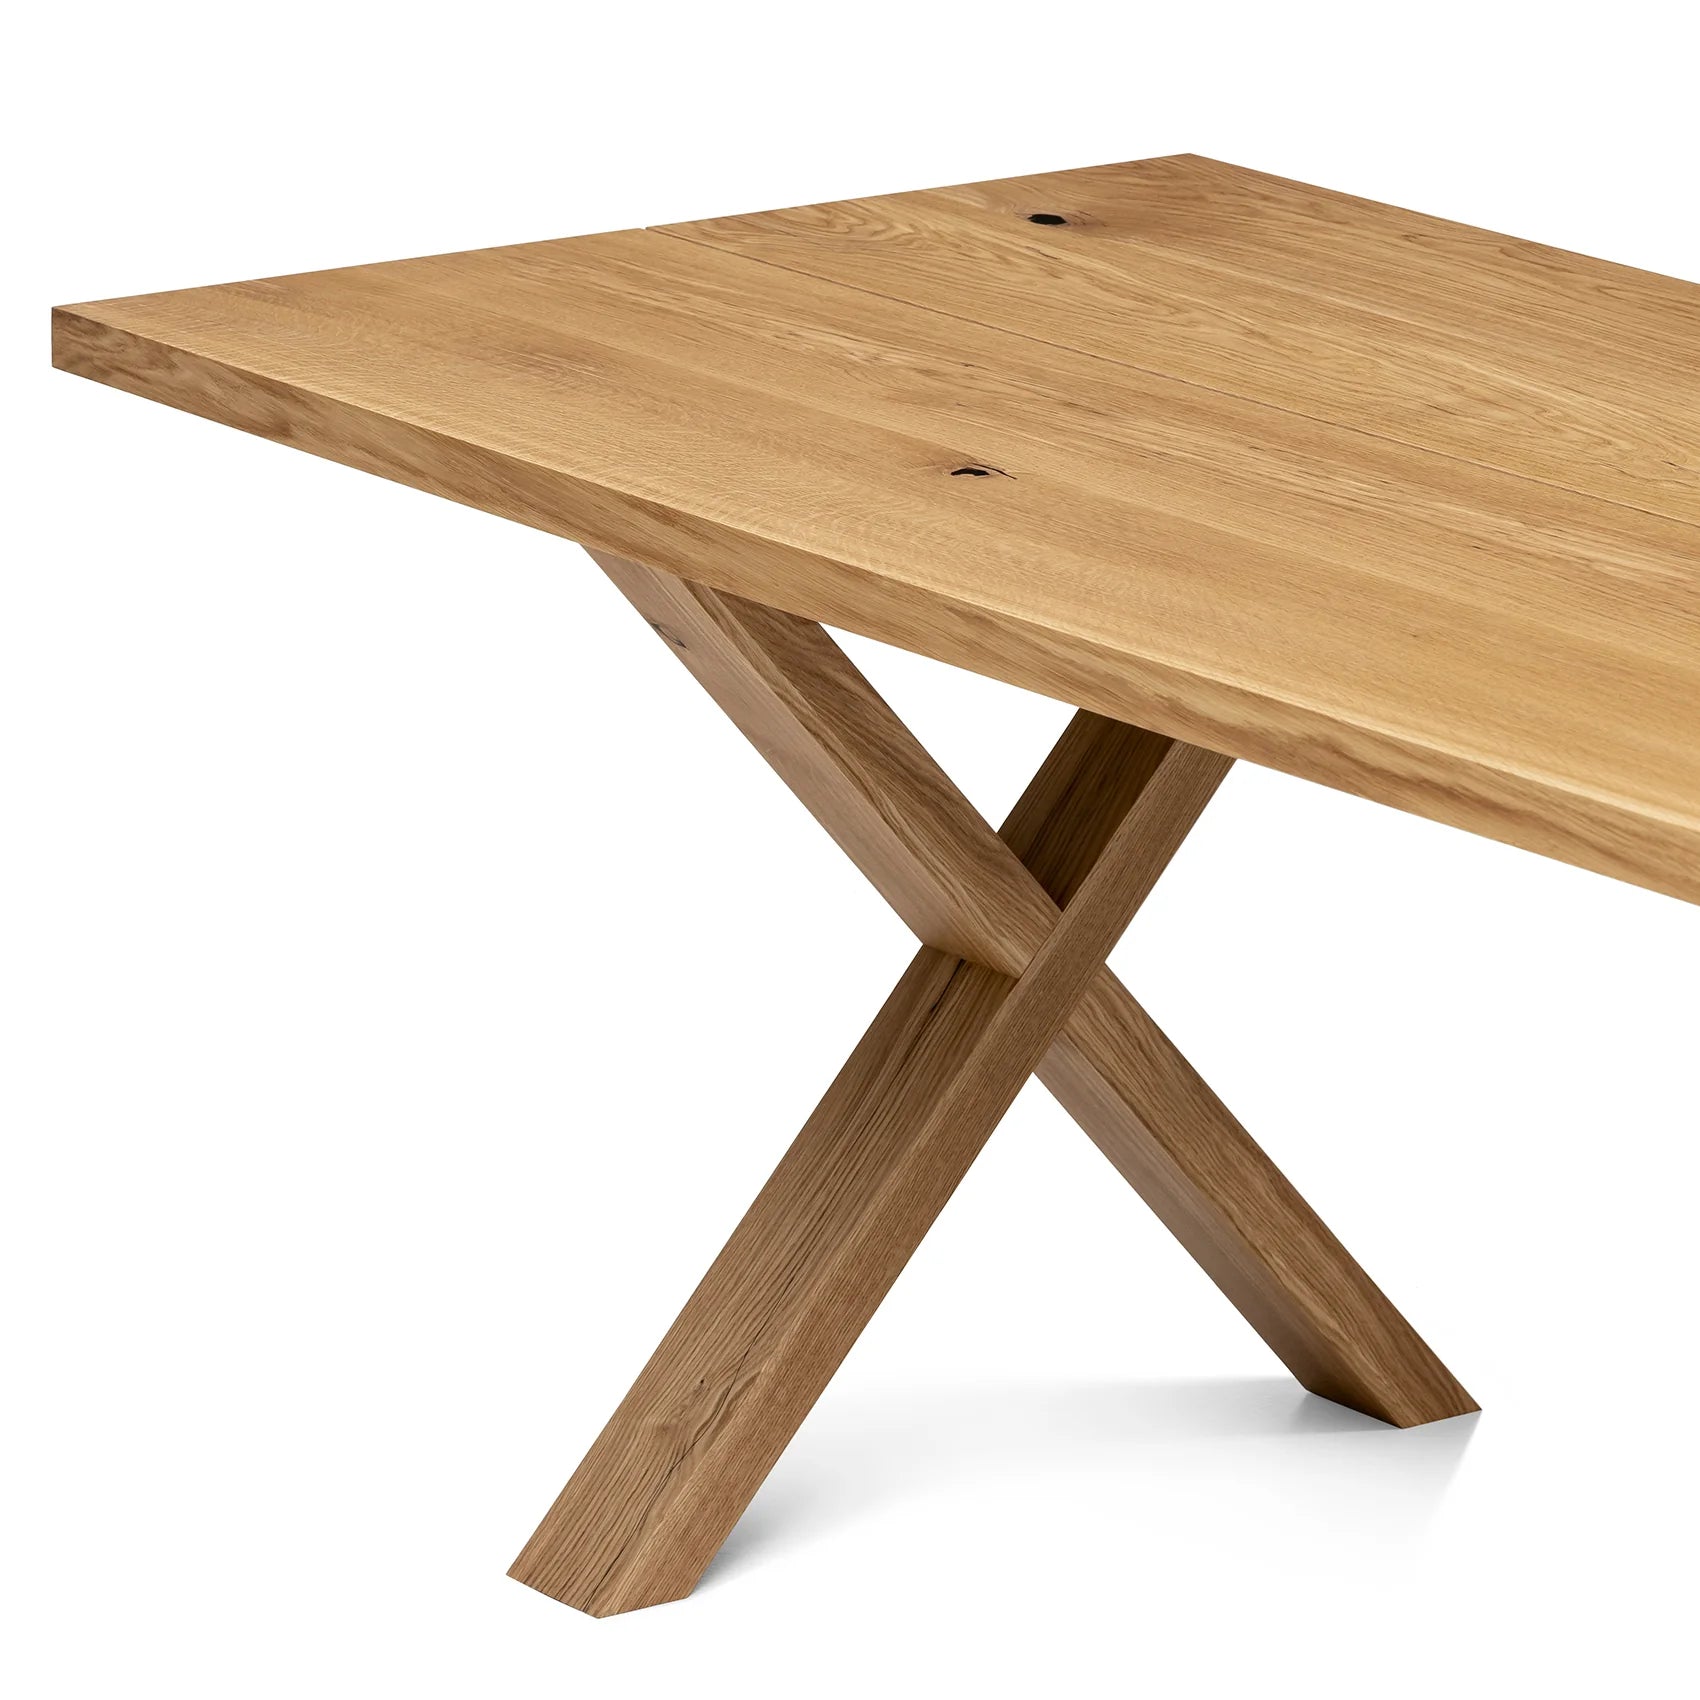 Natural Oak Dining Table Extendable - S10Home